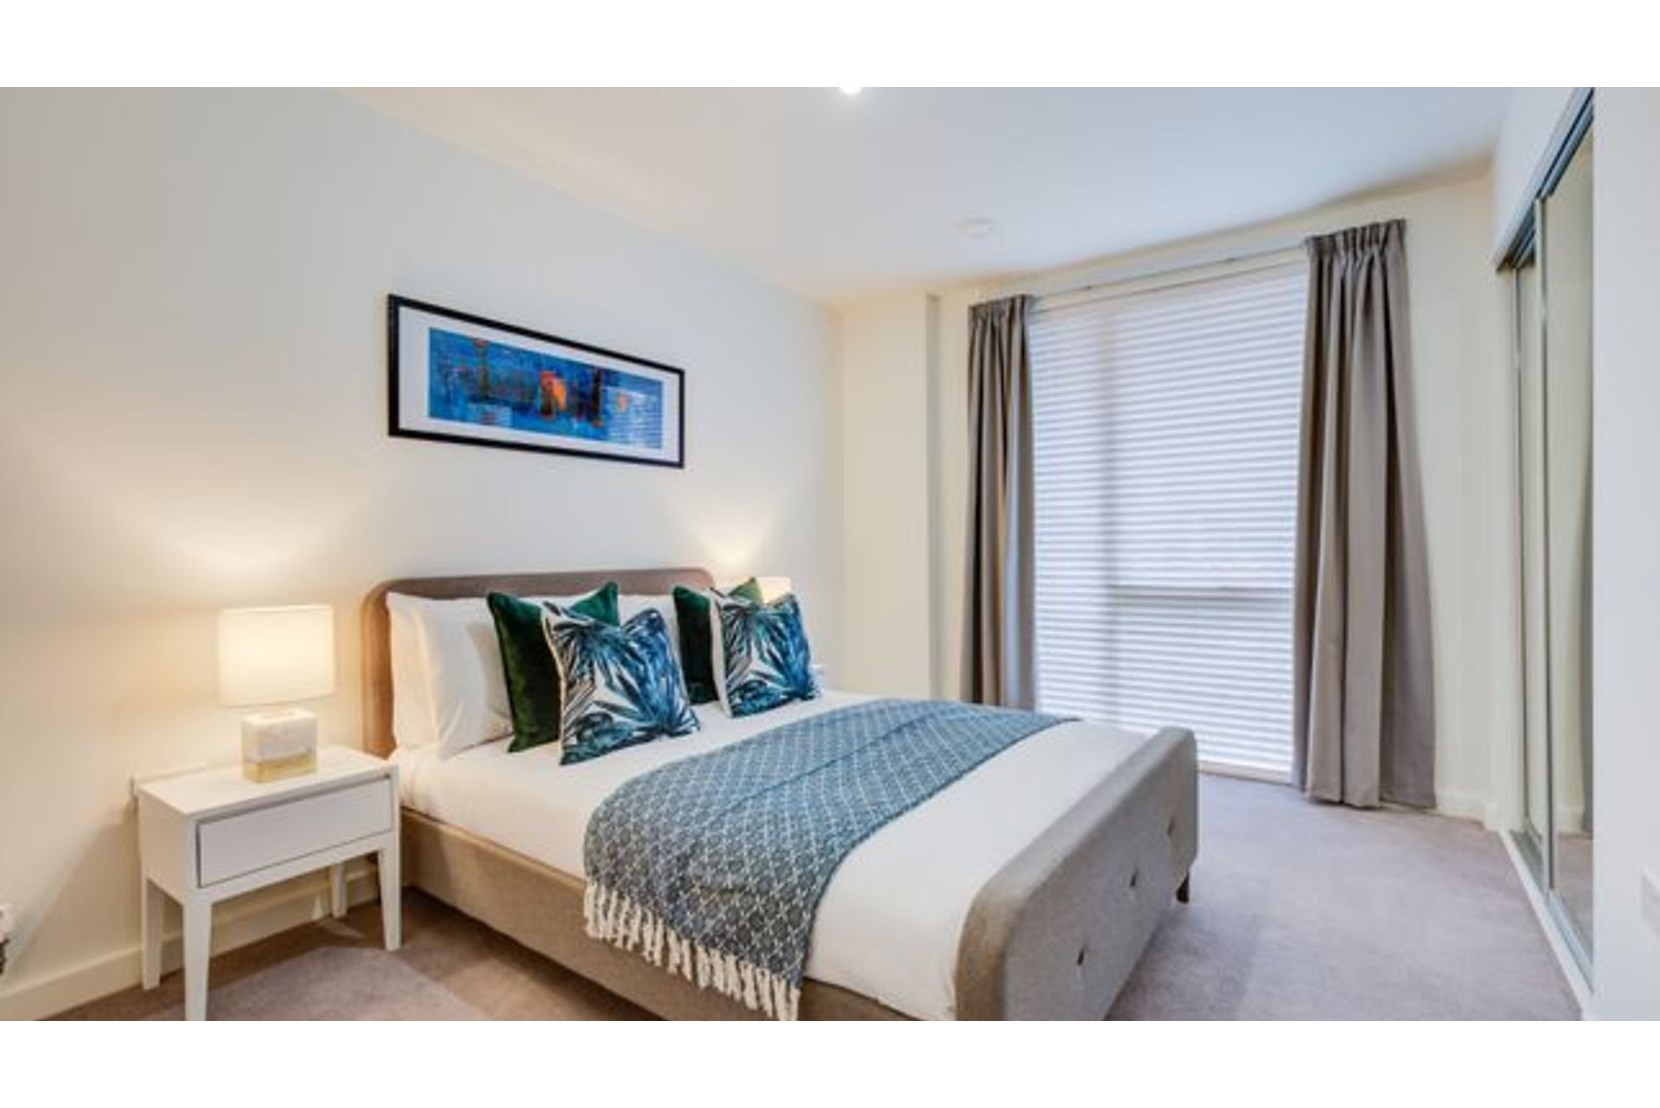 Apartments to Rent by Hera at Hornchurch, Havering, RM11, bedroom